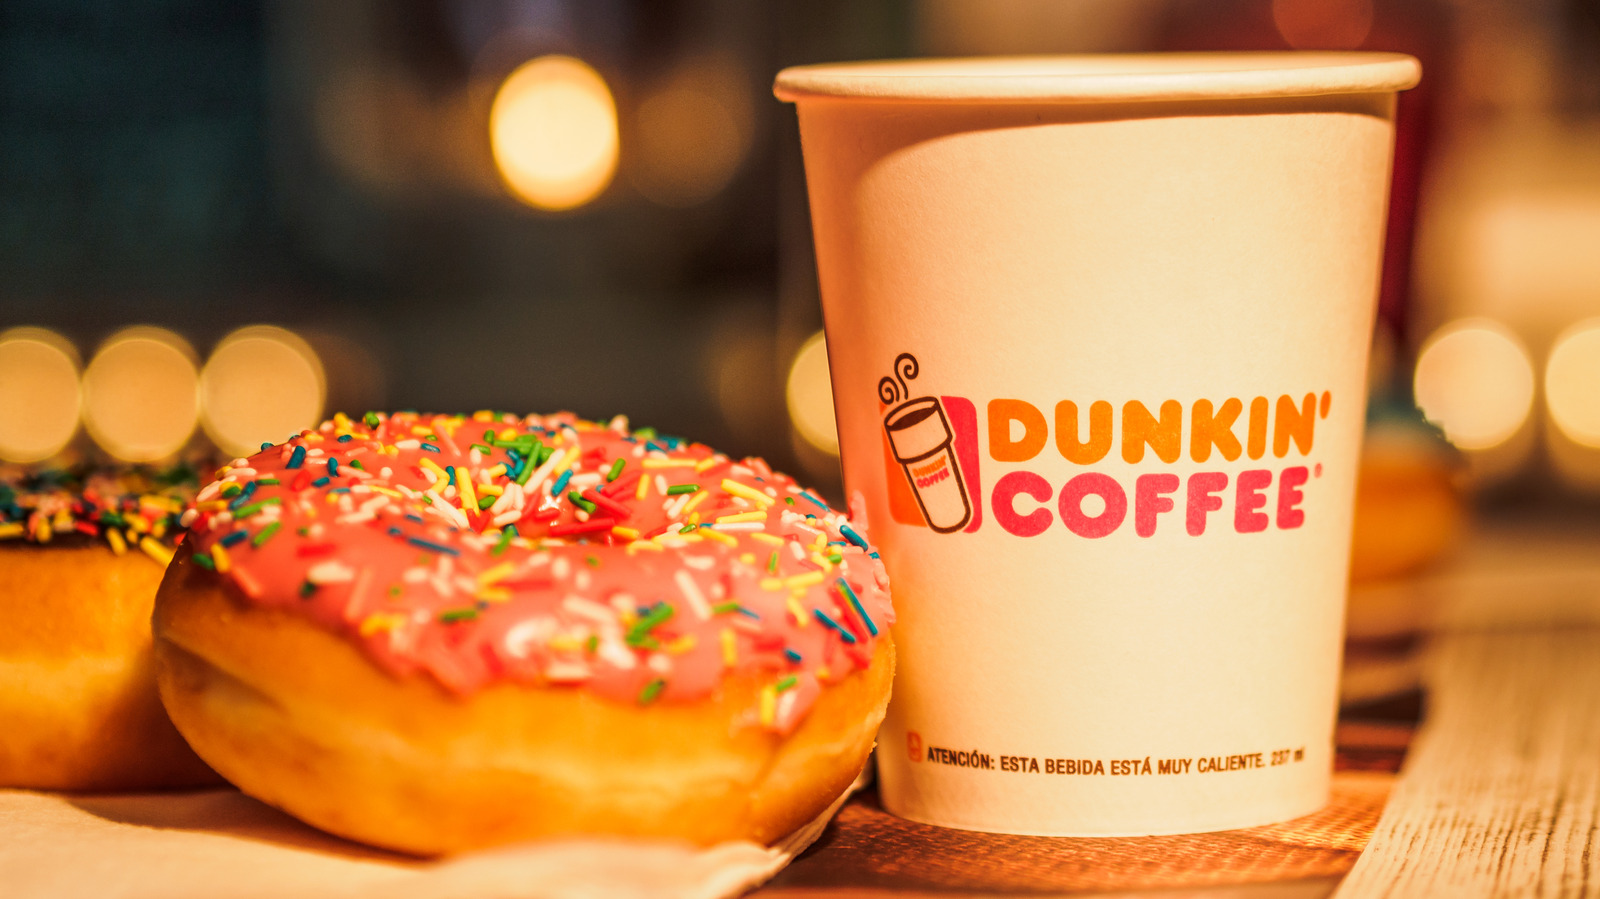 3 New FallInspired Drinks Are Coming To Dunkin'